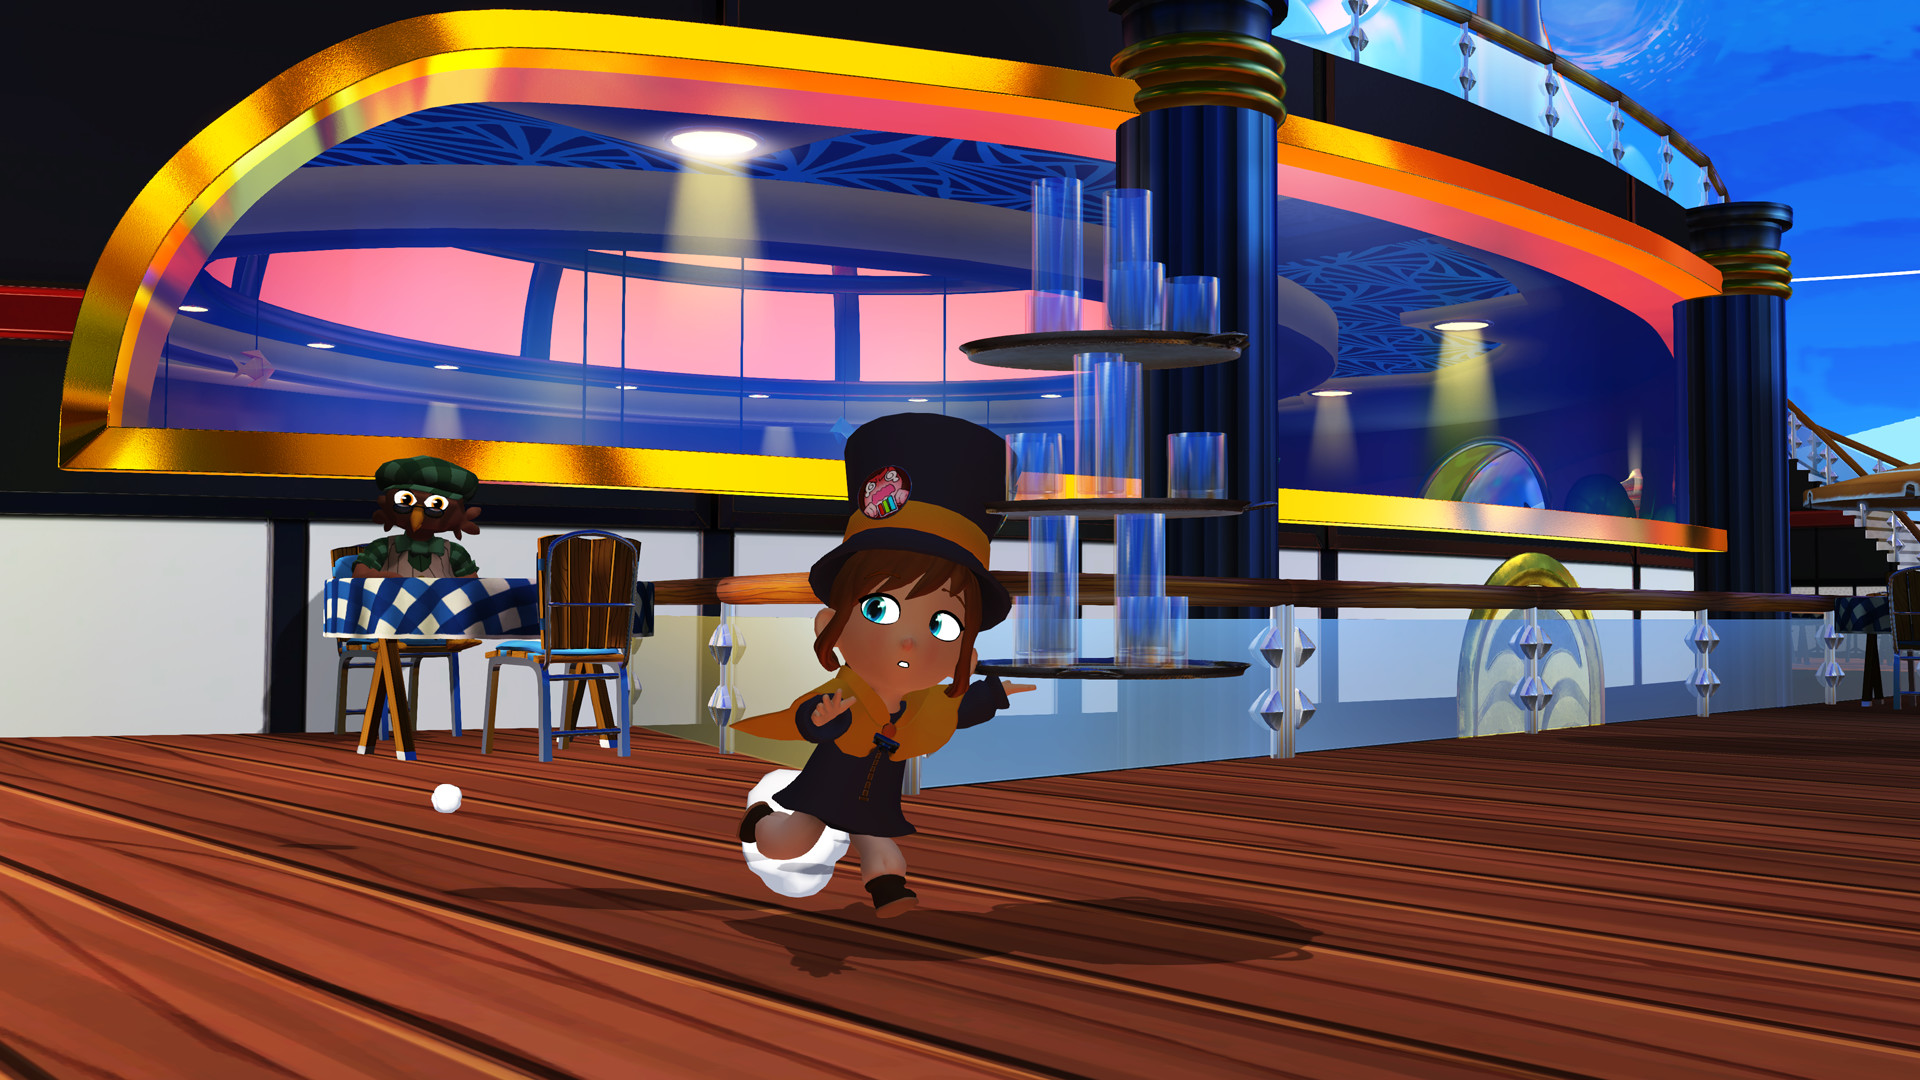 How do I access Seal the Deal DLC? – A Hat in Time